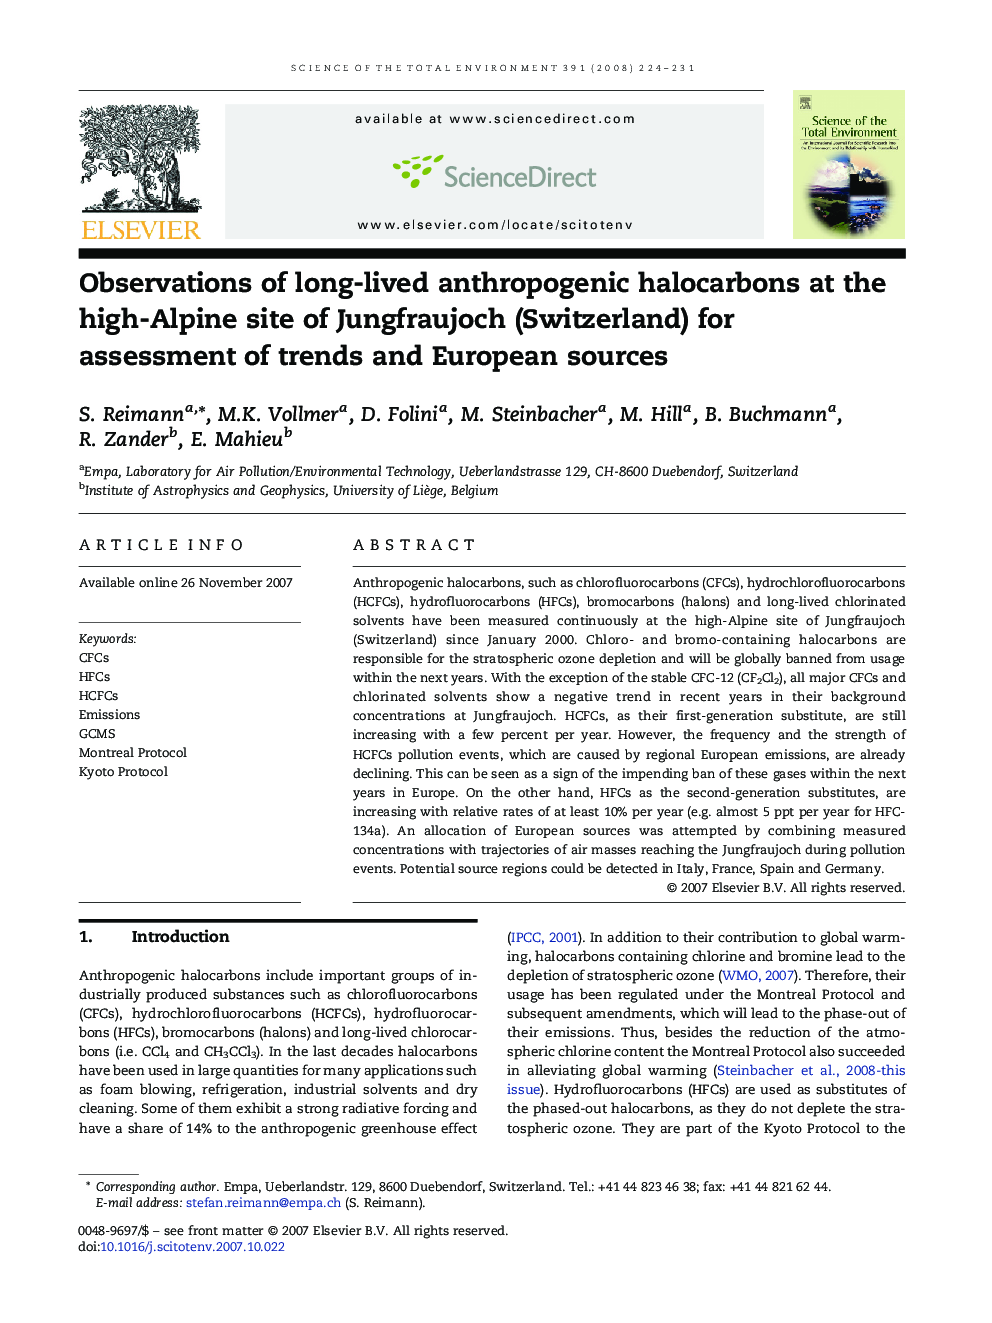 Observations of long-lived anthropogenic halocarbons at the high-Alpine site of Jungfraujoch (Switzerland) for assessment of trends and European sources